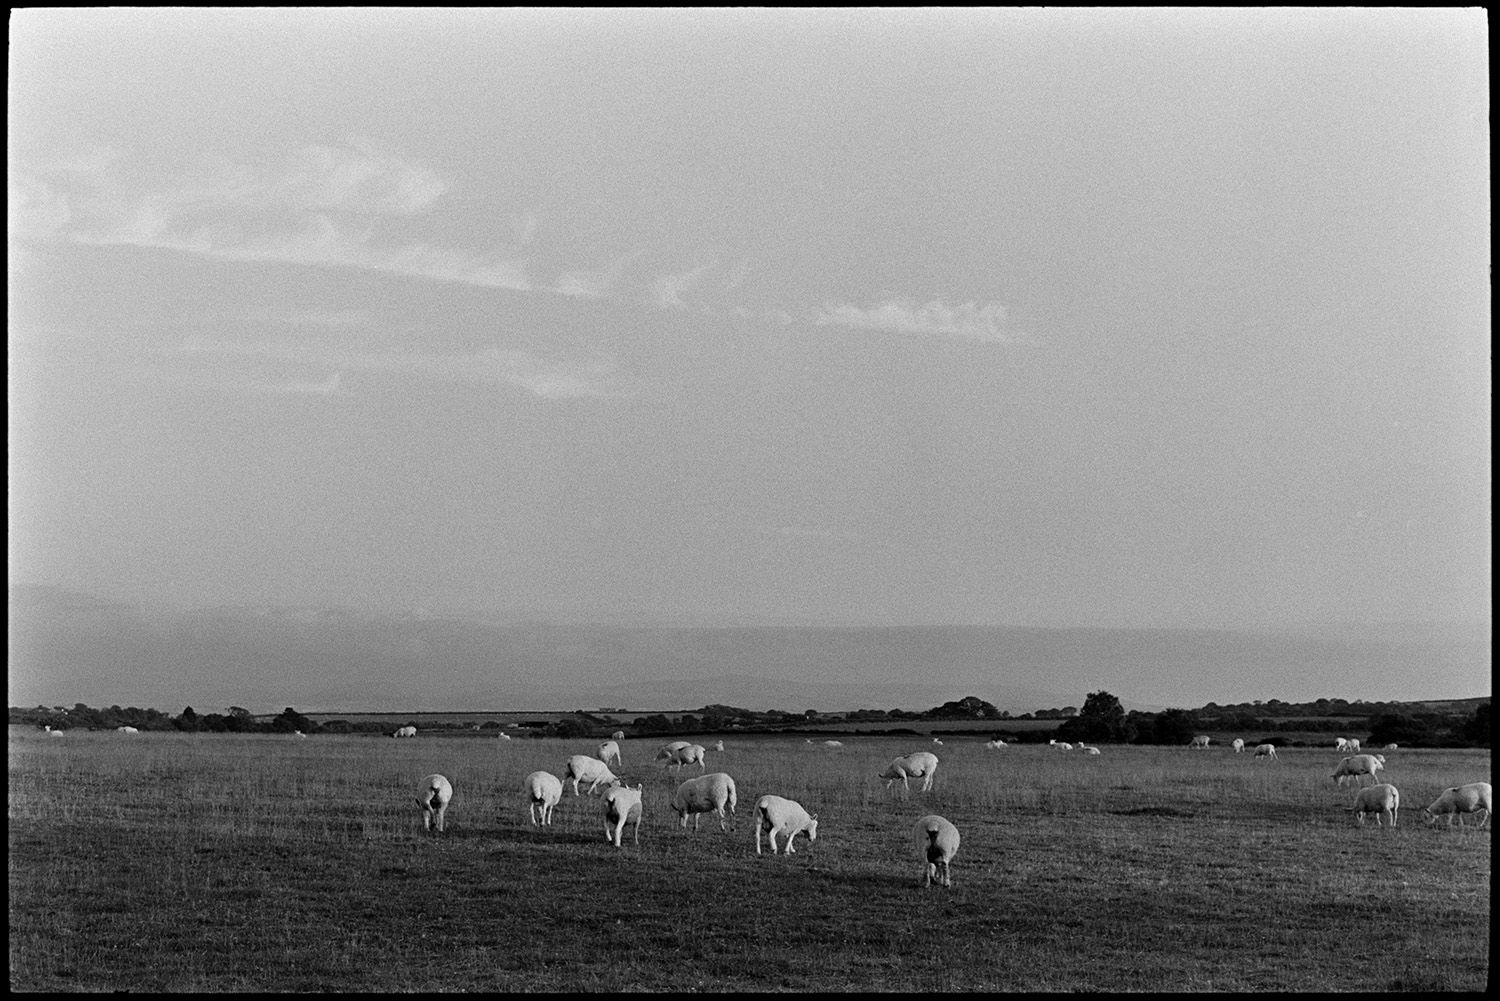 Landscape with sheep and clouds.
[Sheep grazing in a field on Stafford Moor near Dolton. Dartmoor hills are faintly visible in the background and clouds can be seen in the sky.]